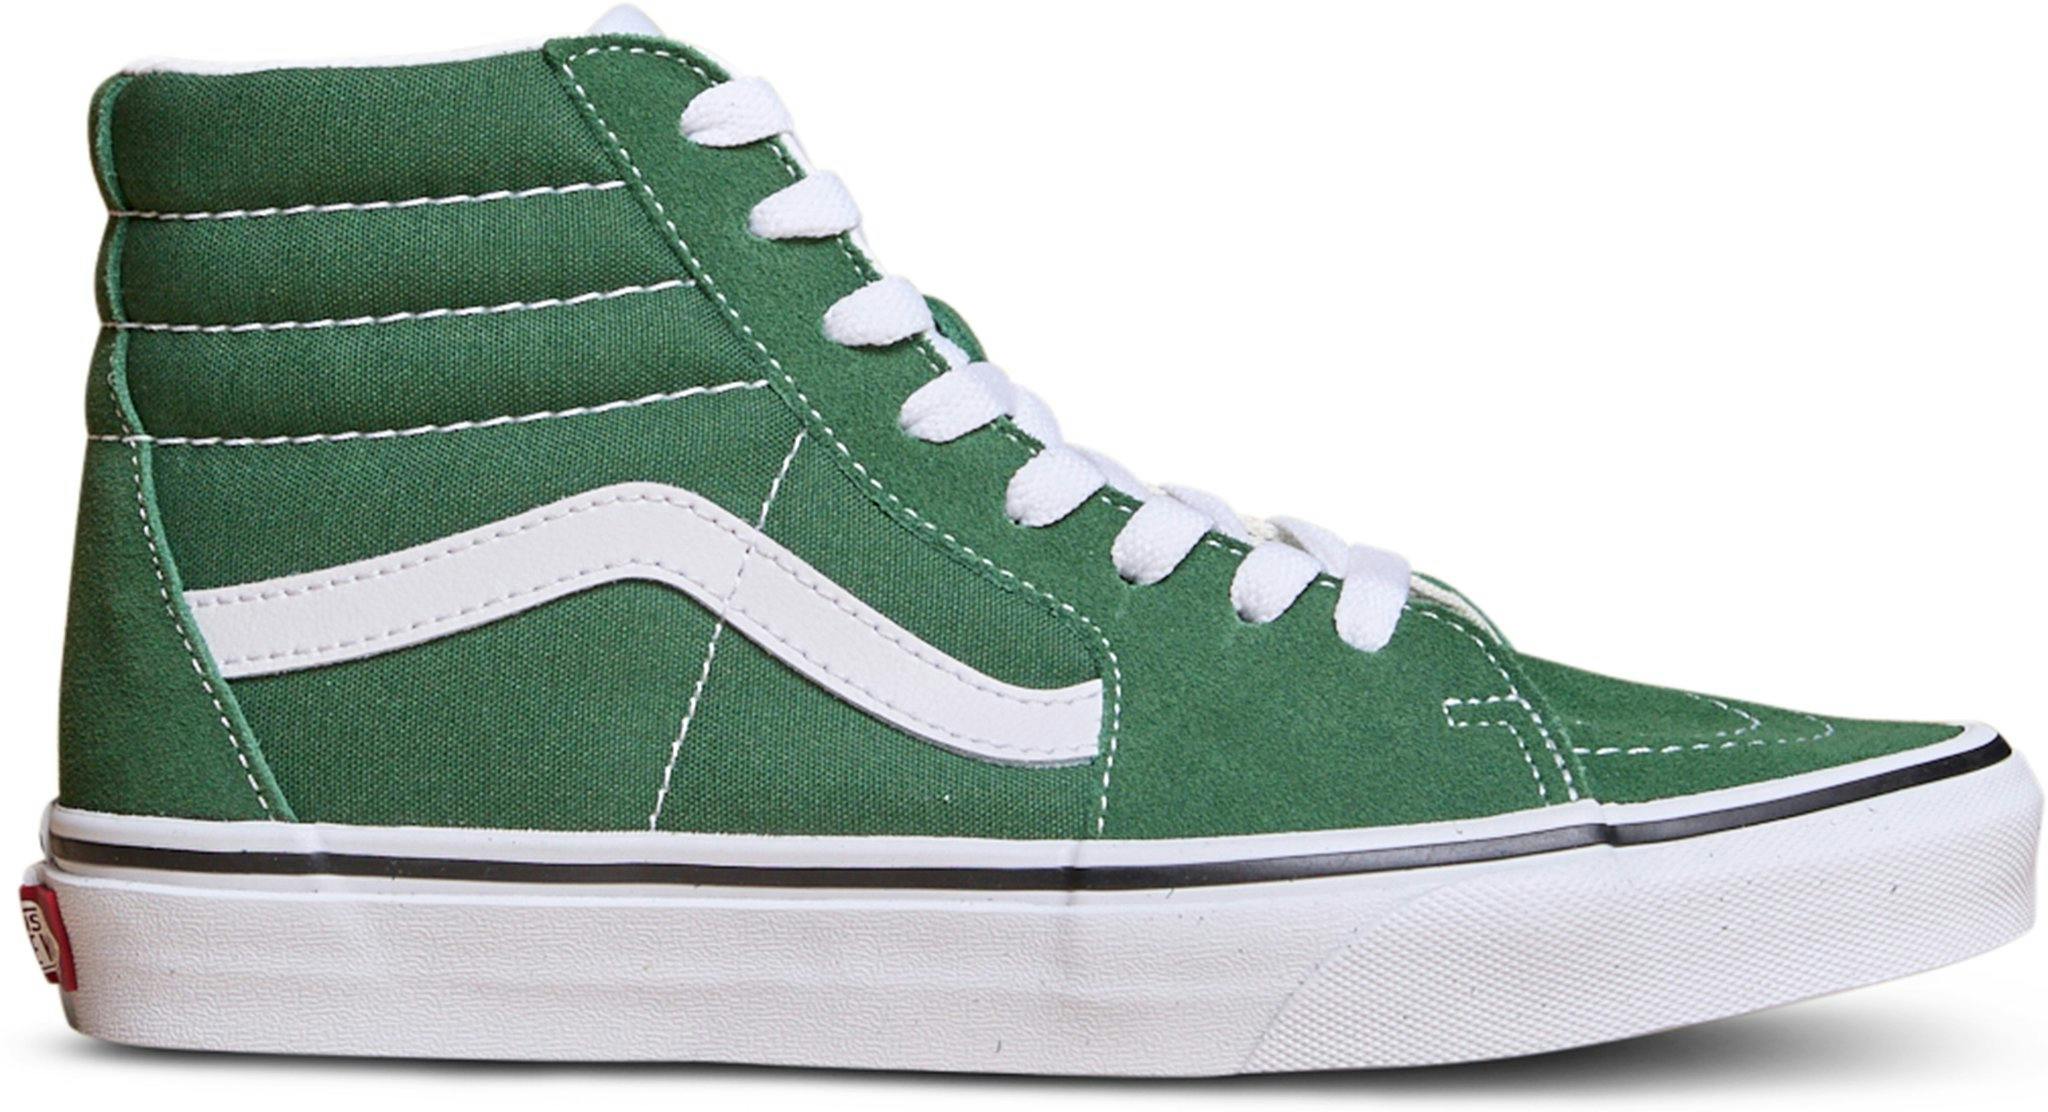 Product image for SK8 Hi Shoes - Unisex